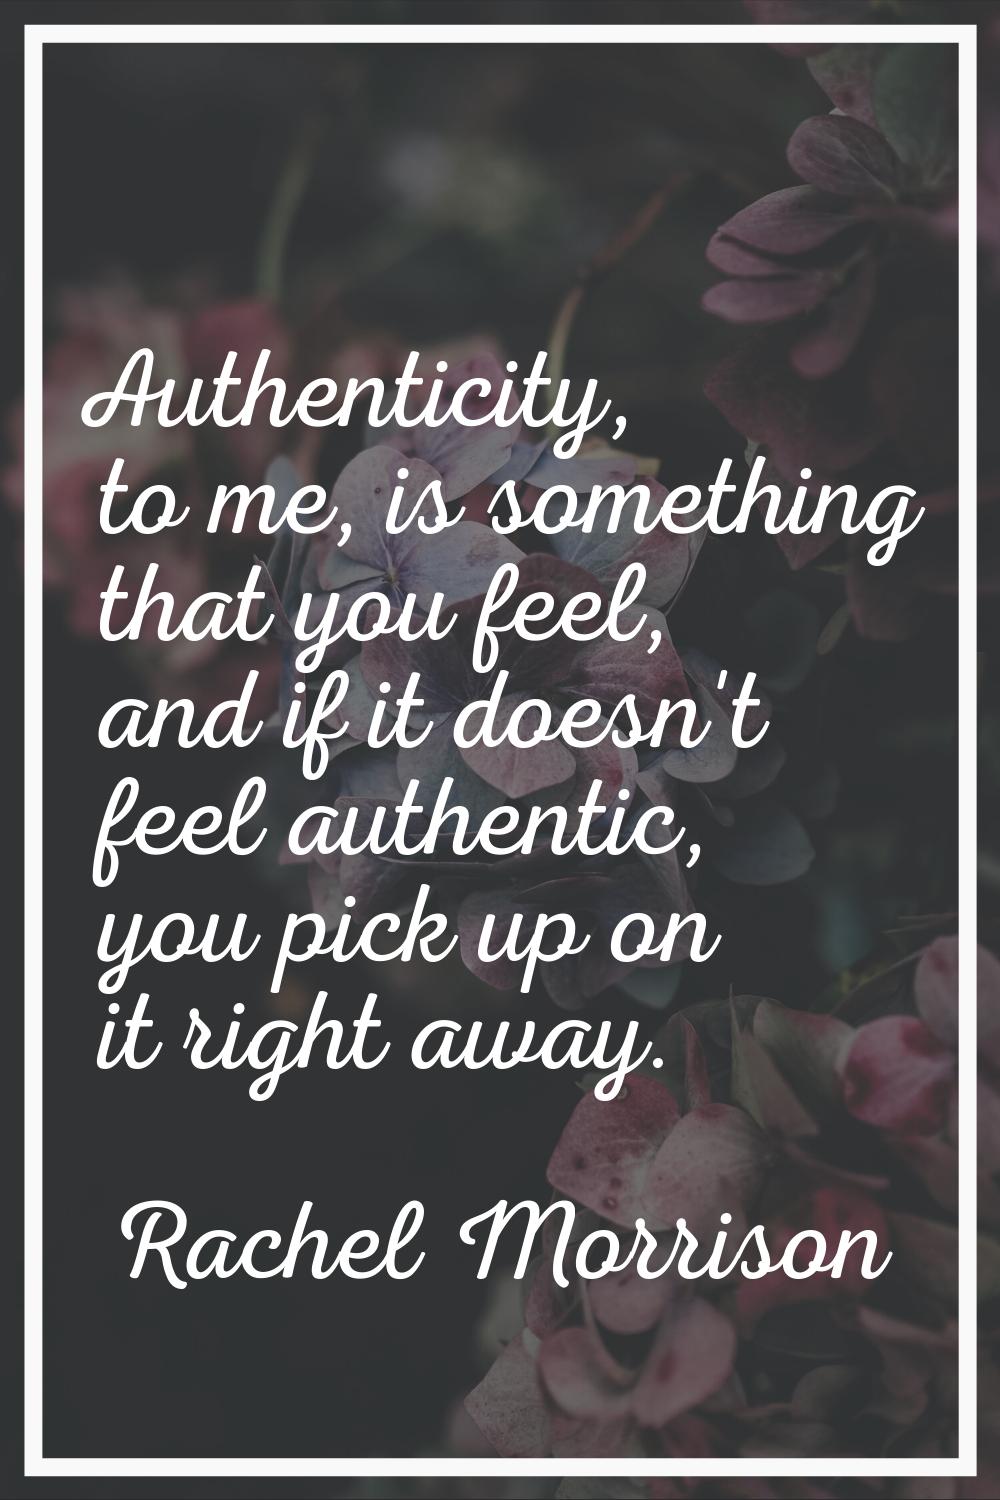 Authenticity, to me, is something that you feel, and if it doesn't feel authentic, you pick up on i